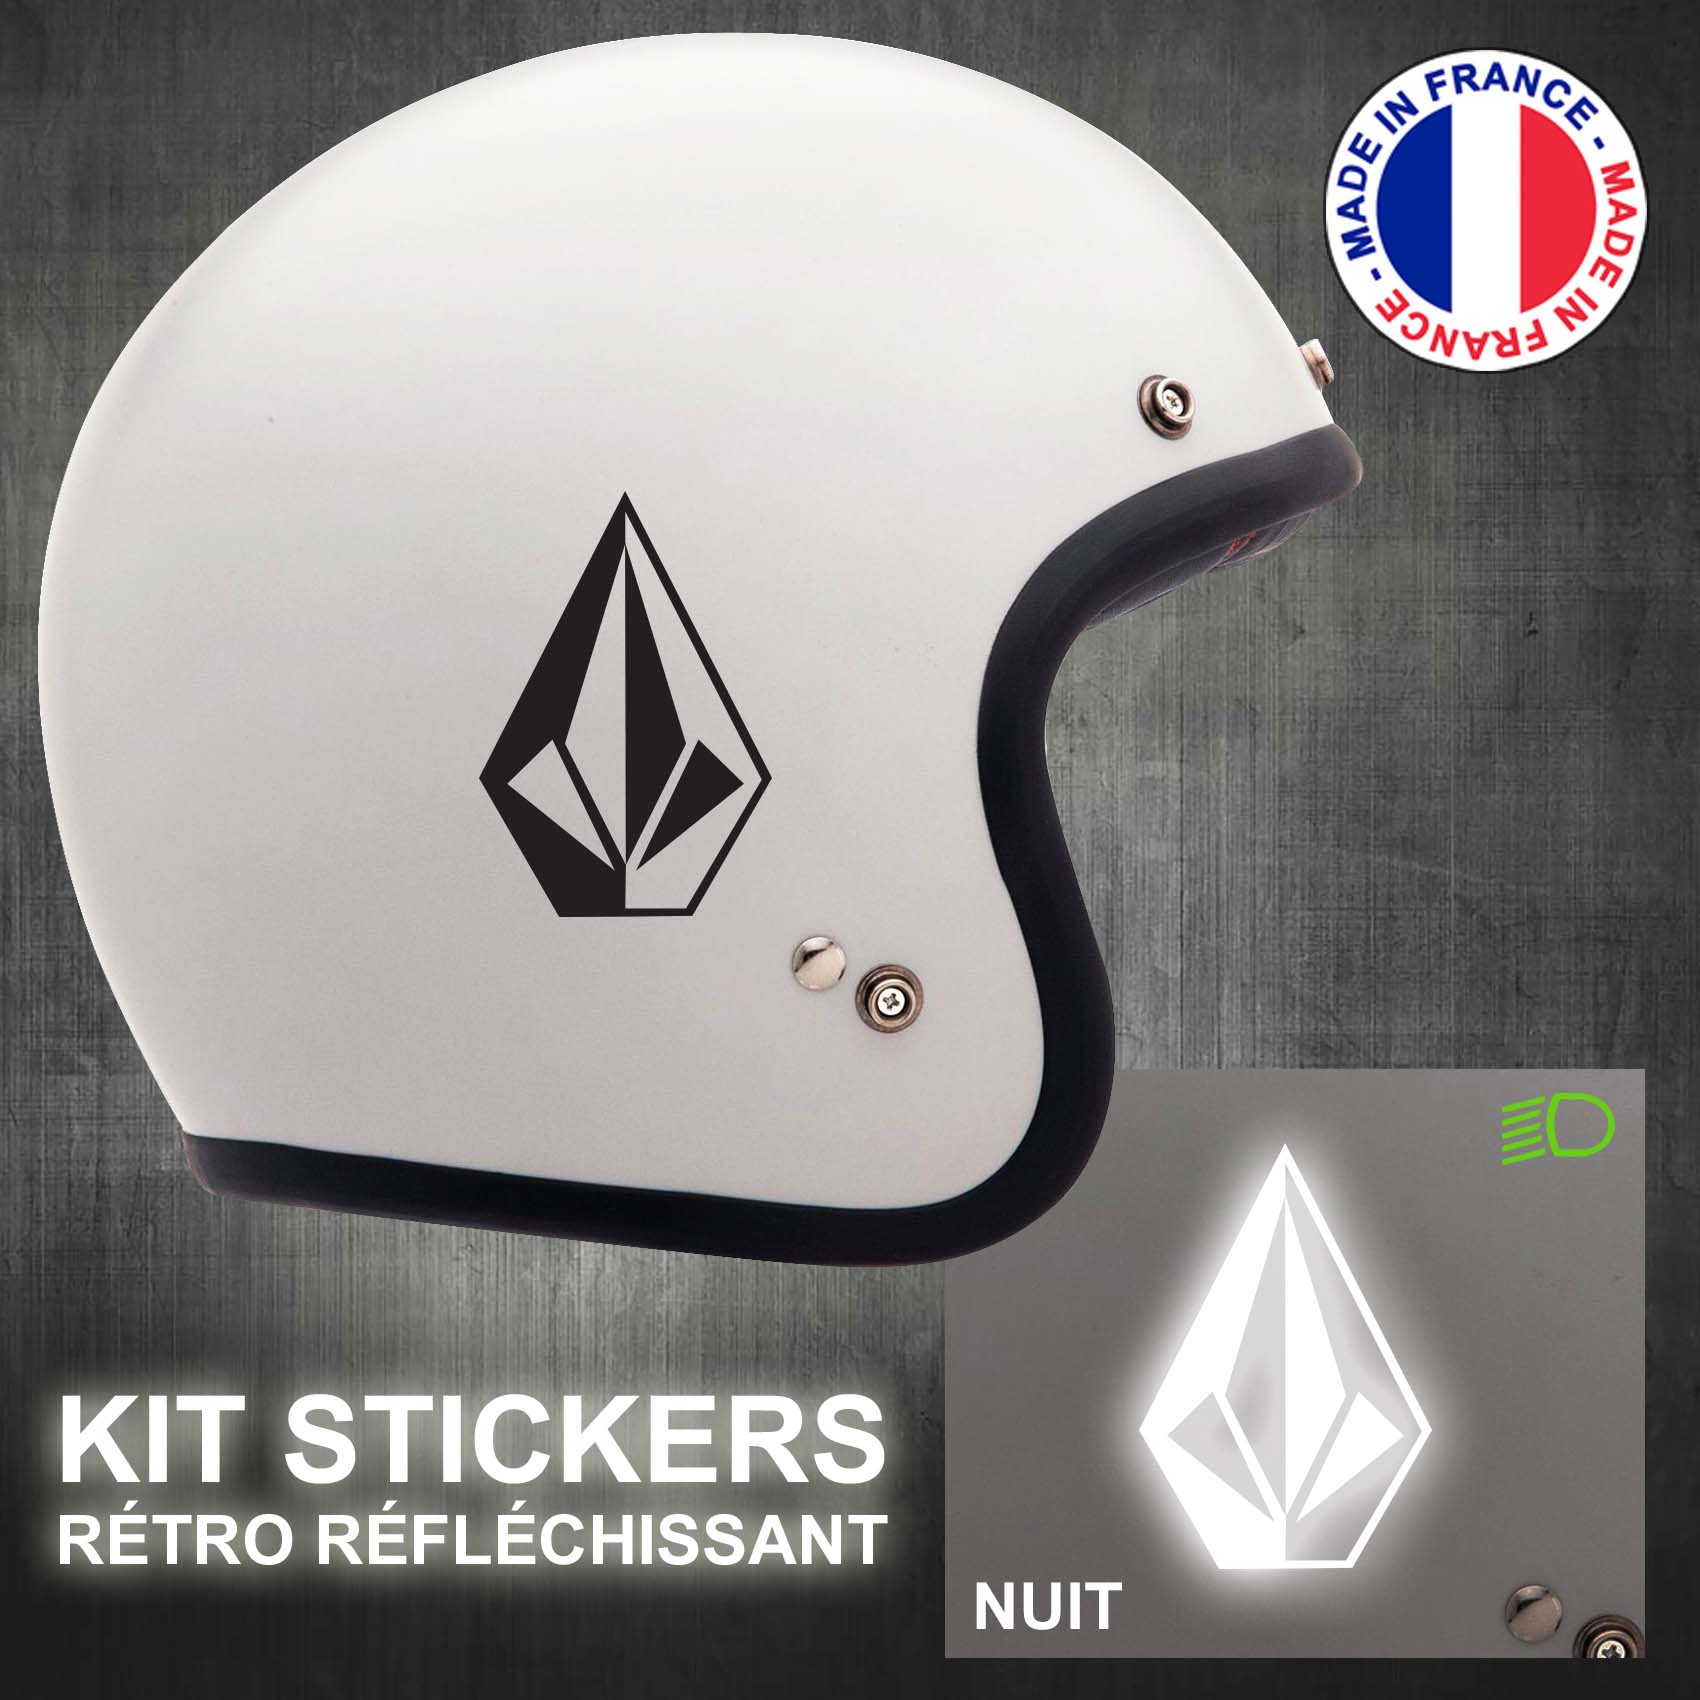 stickers-casque-moto-volcom-ref1-retro-reflechissant-autocollant-moto-velo-tuning-racing-route-sticker-casques-adhesif-scooter-nuit-securite-decals-personnalise-personnalisable-min